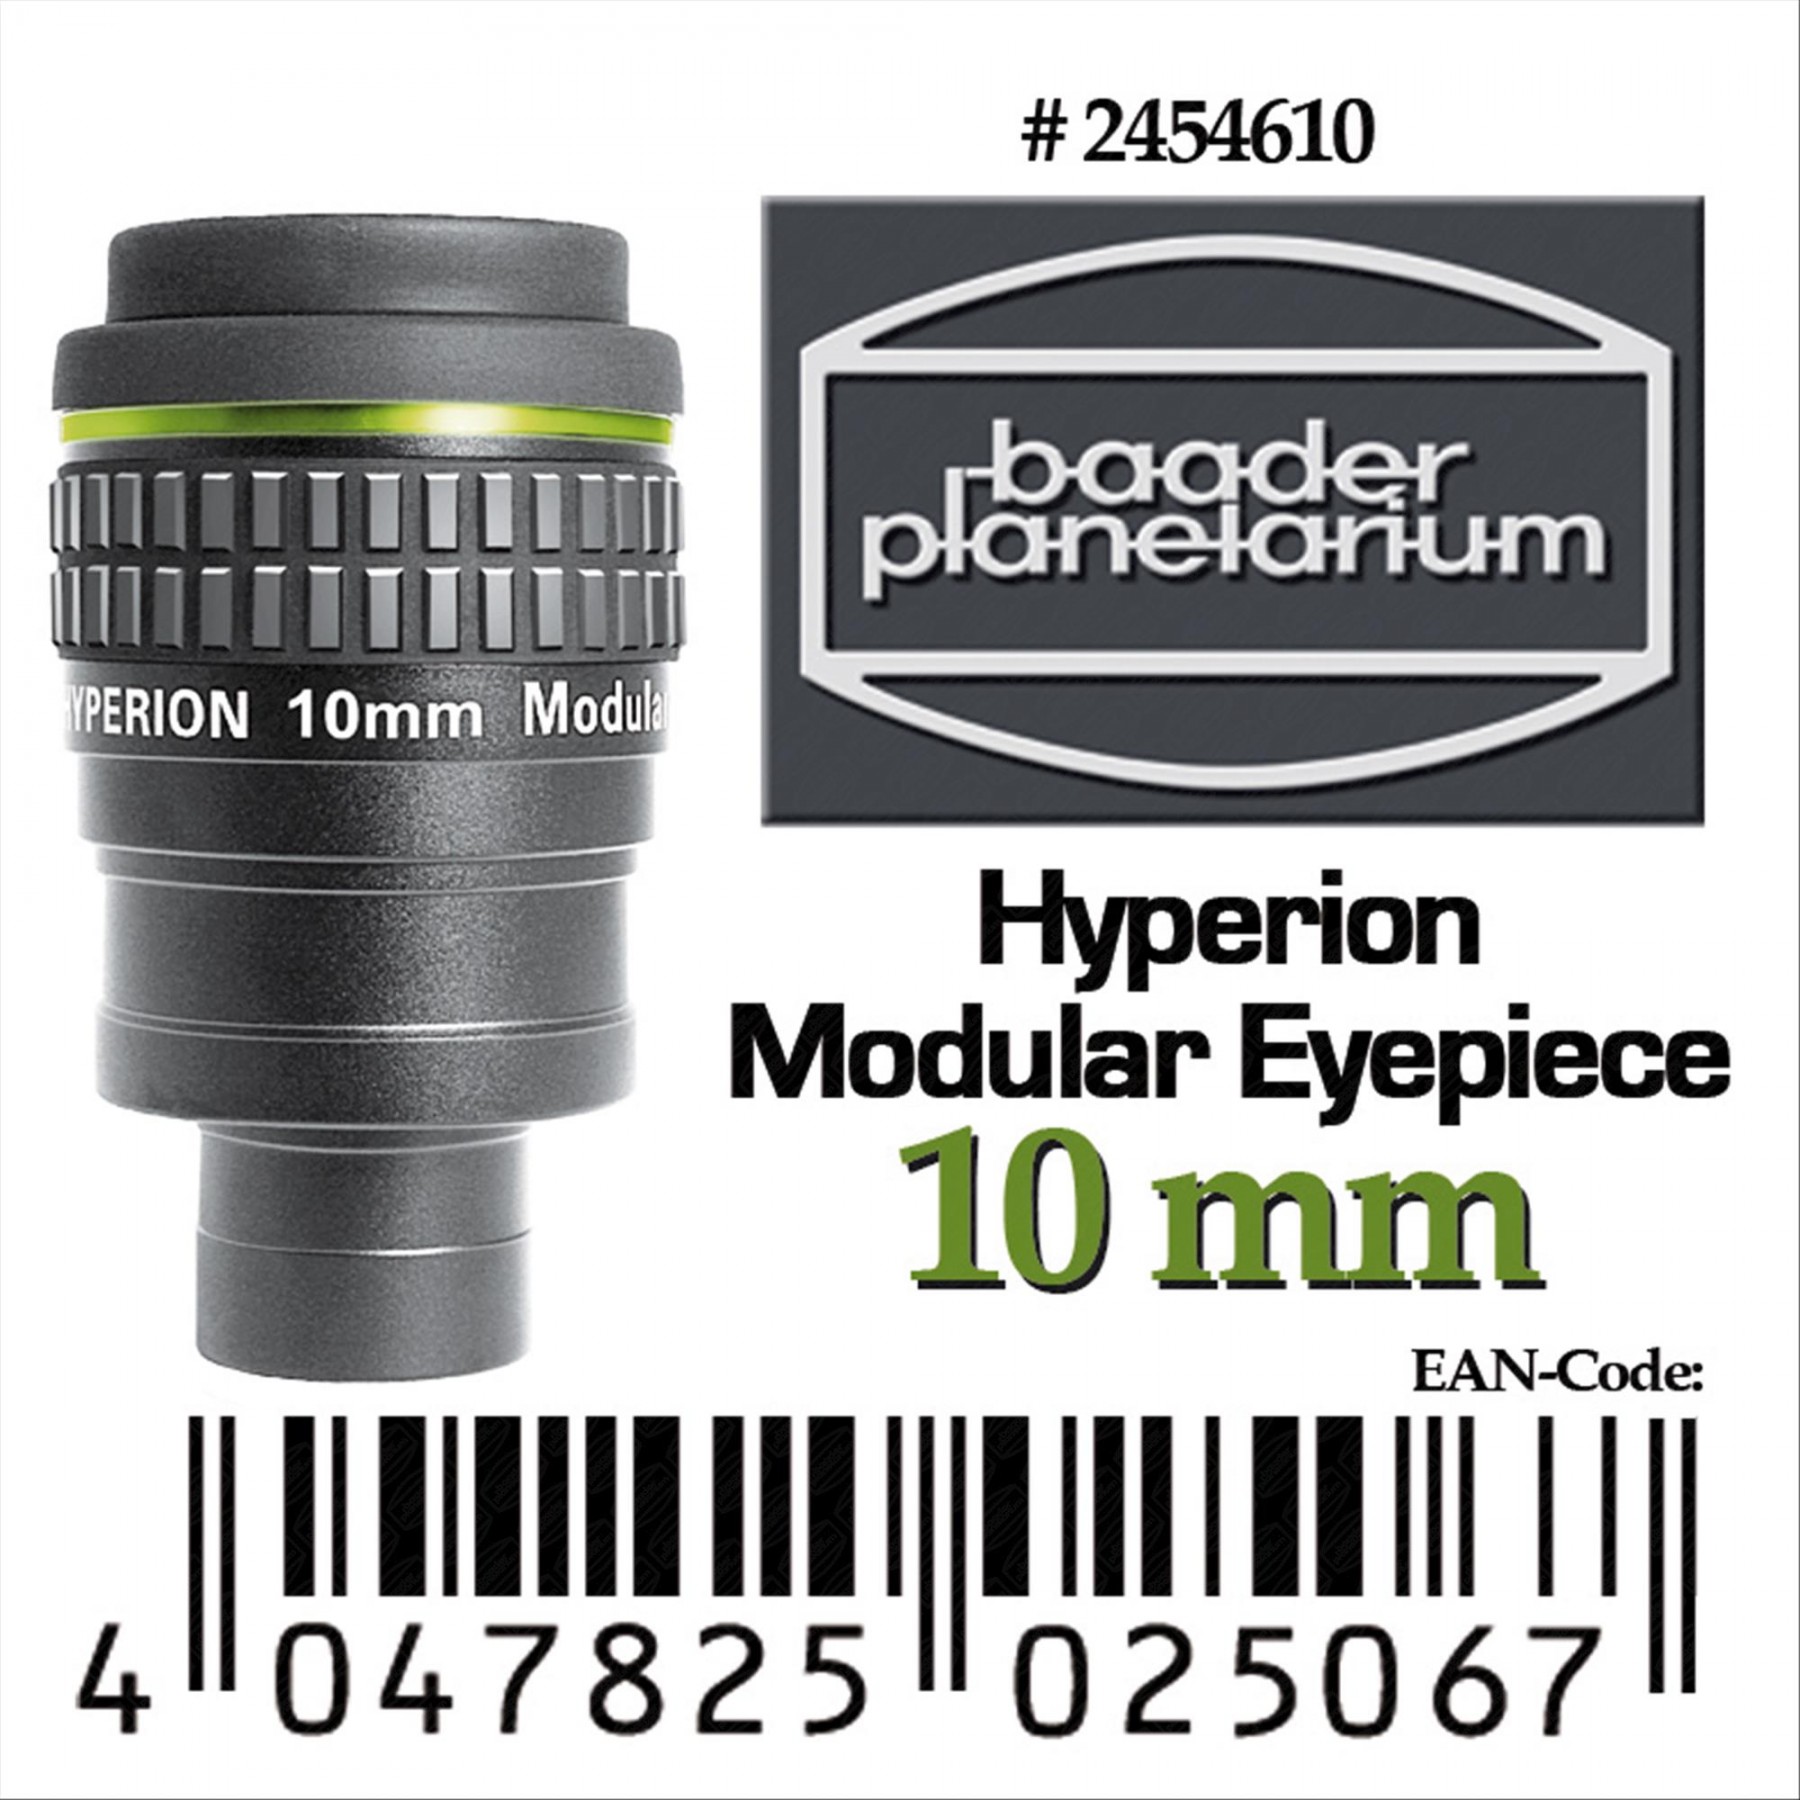 Baader HYPERION 10mm Oculare 2454610 UK STOCK 